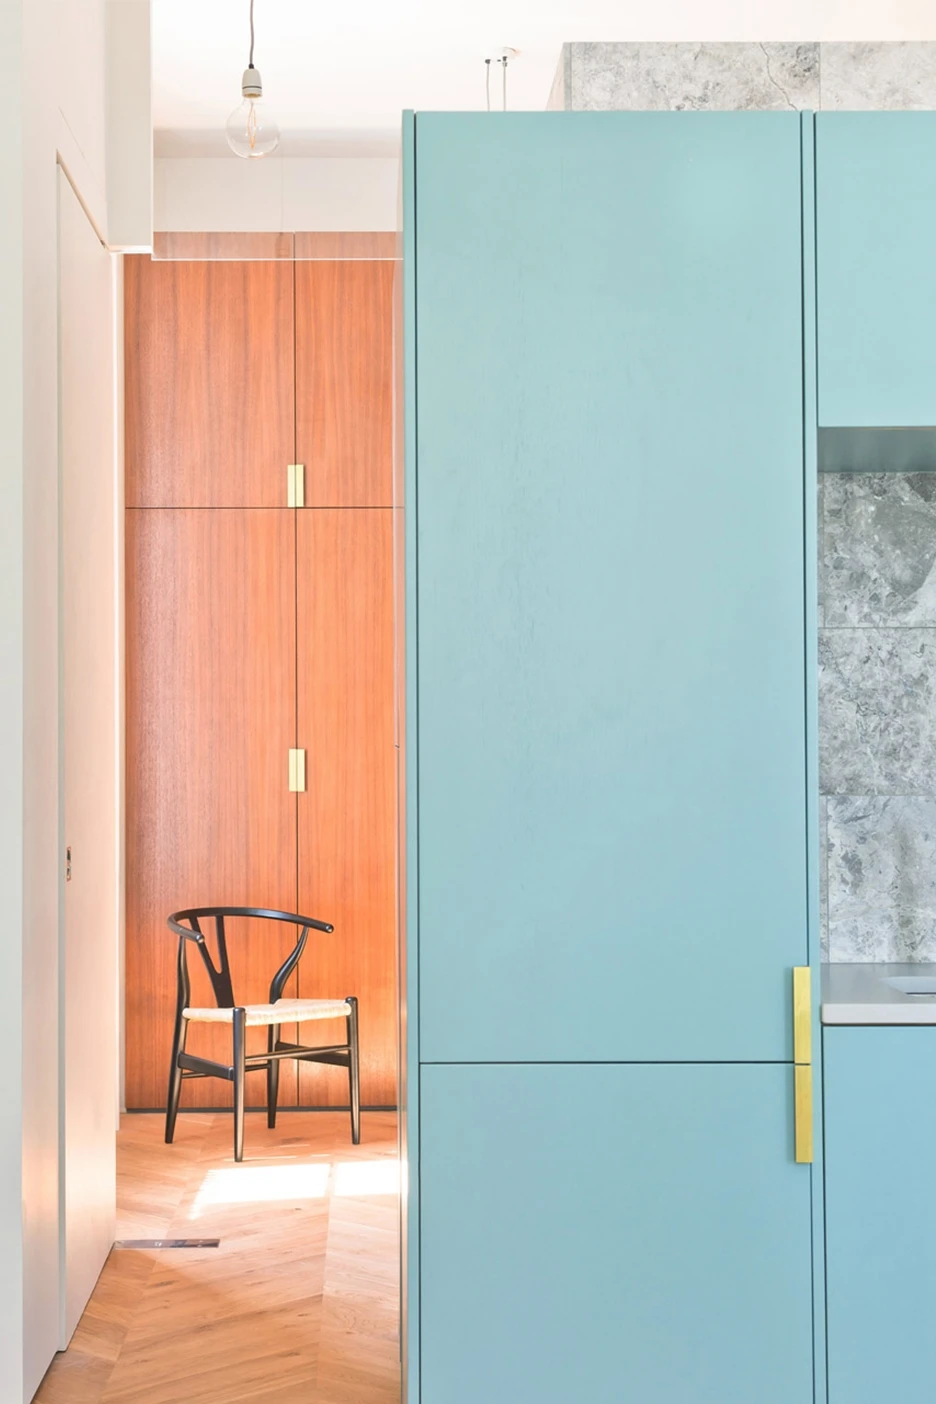 Blue doors & golden handles that flow into the next room, tying together eclectic contemporary aesthetics with a touch of symmetry & neat lines.